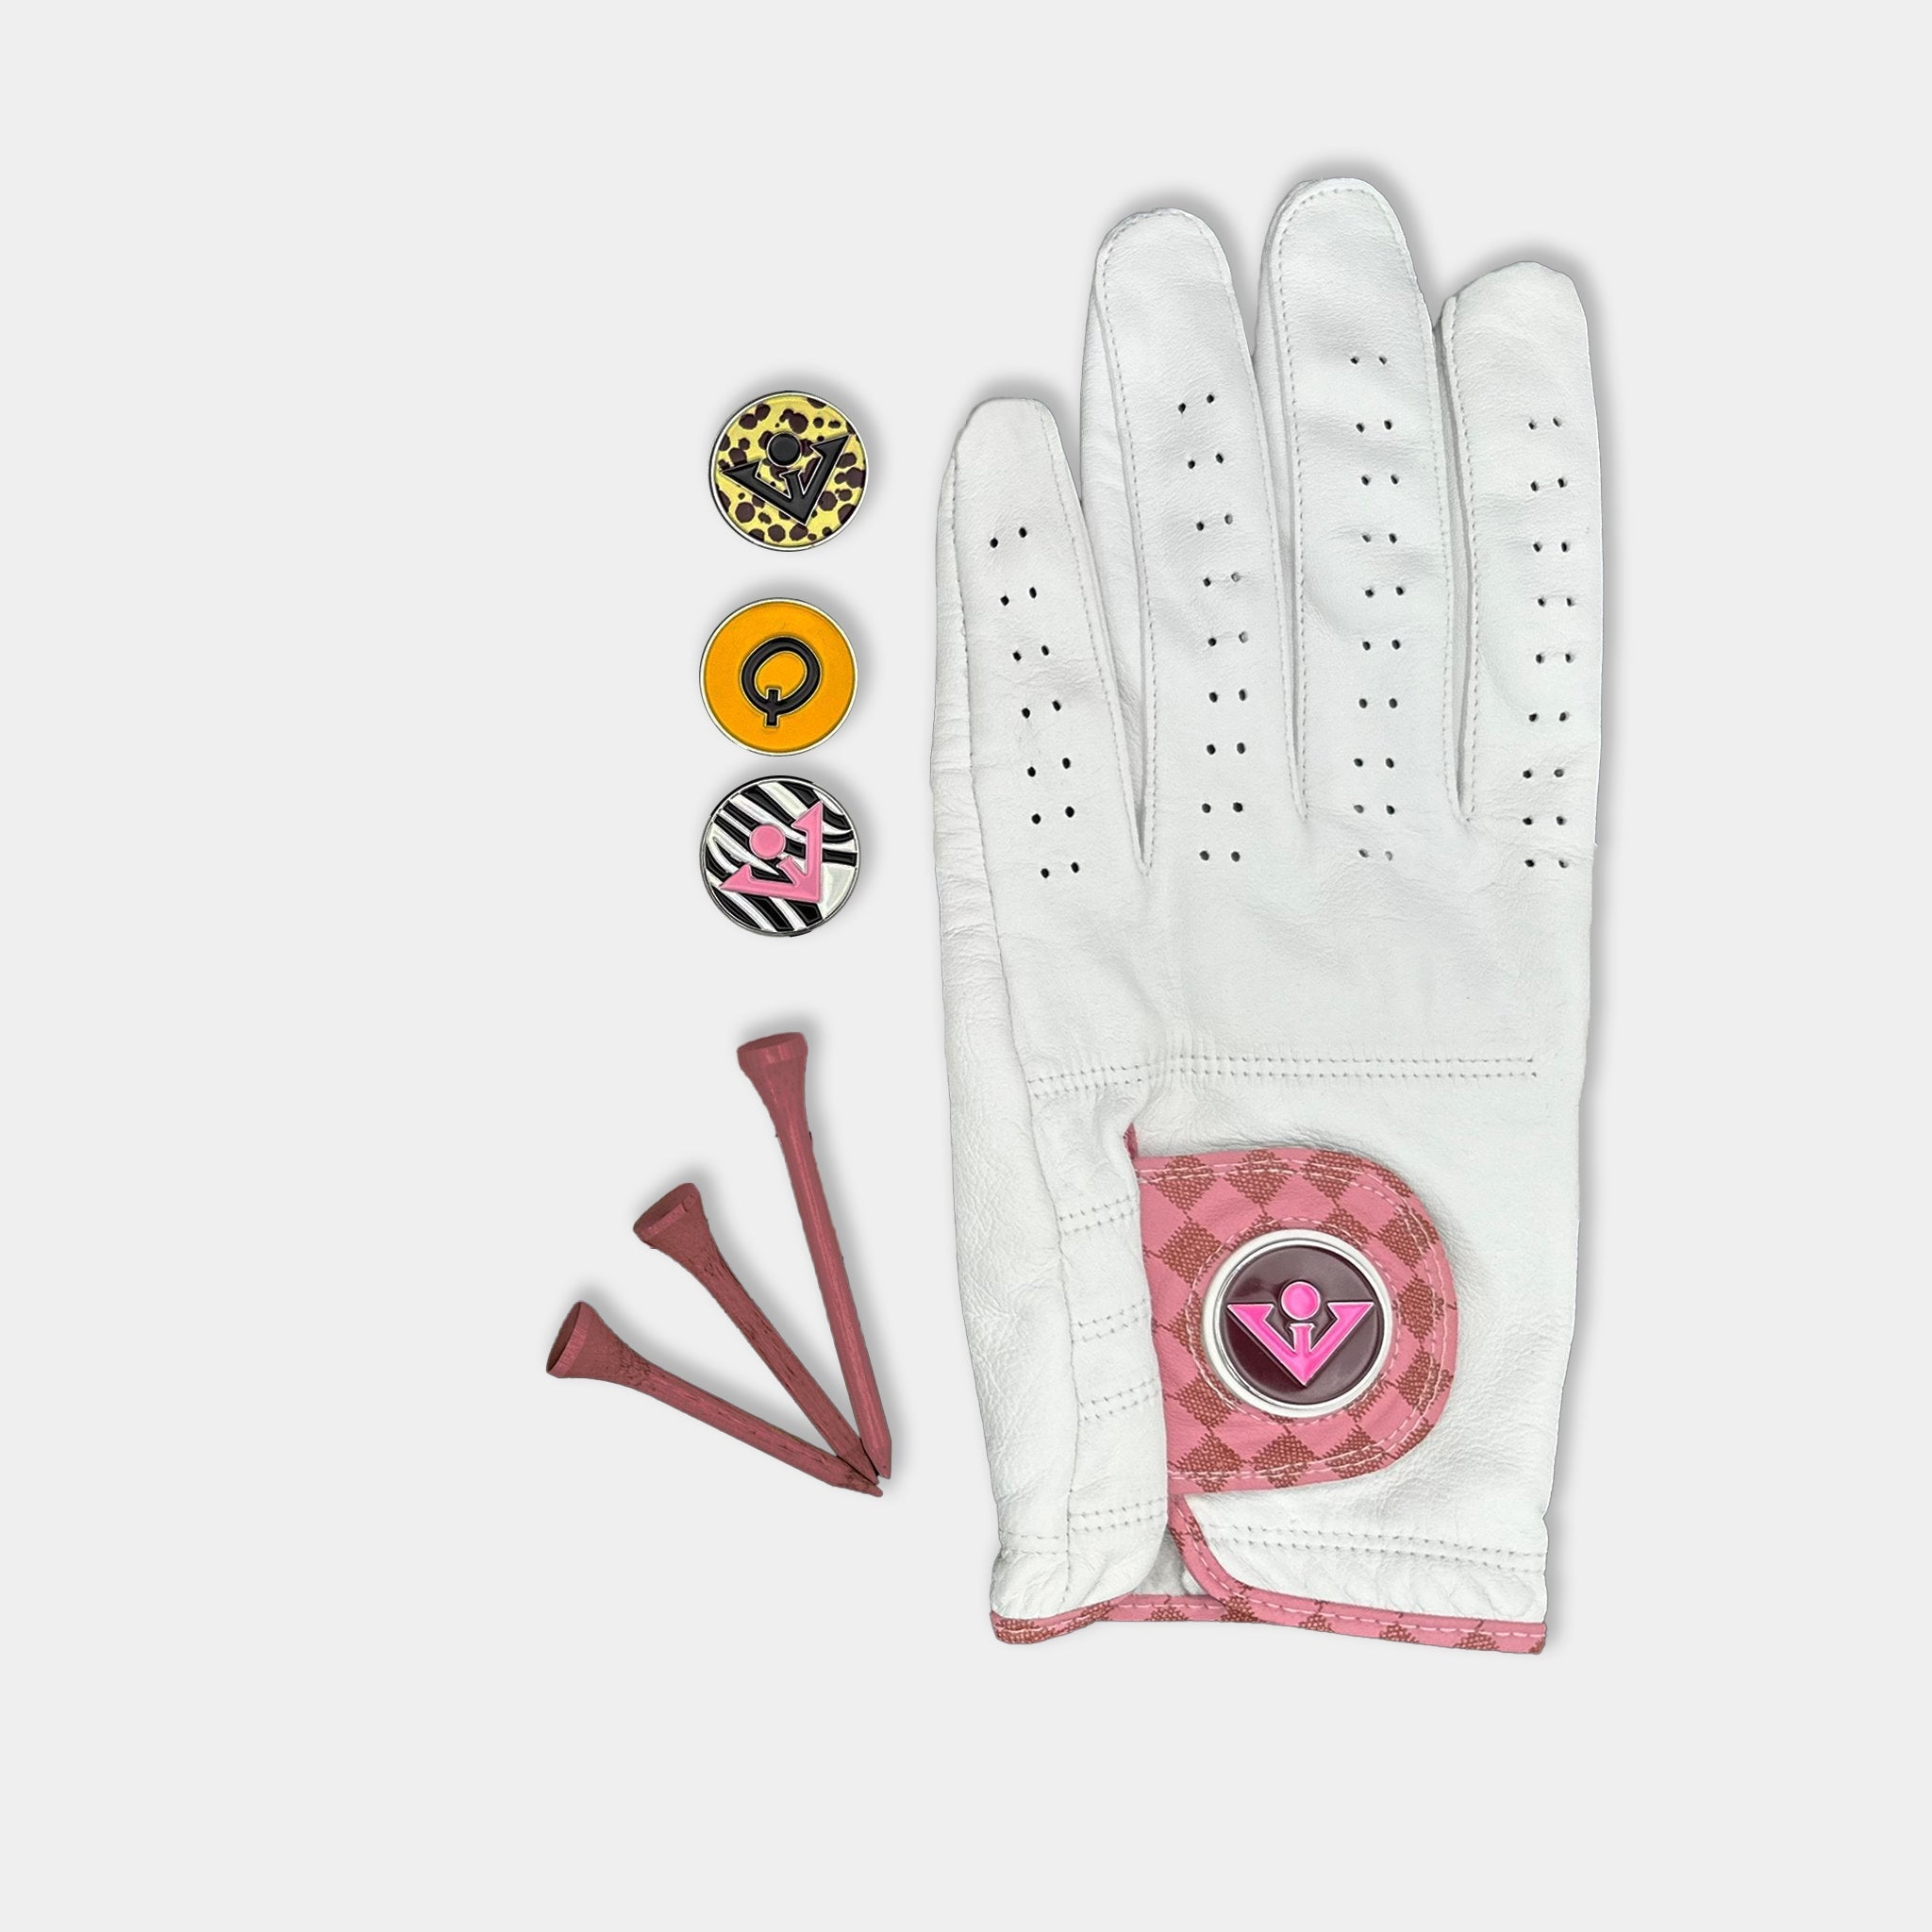 White and blush pink designer golf glove with a black backdrop to show case the unique colors and patterns.